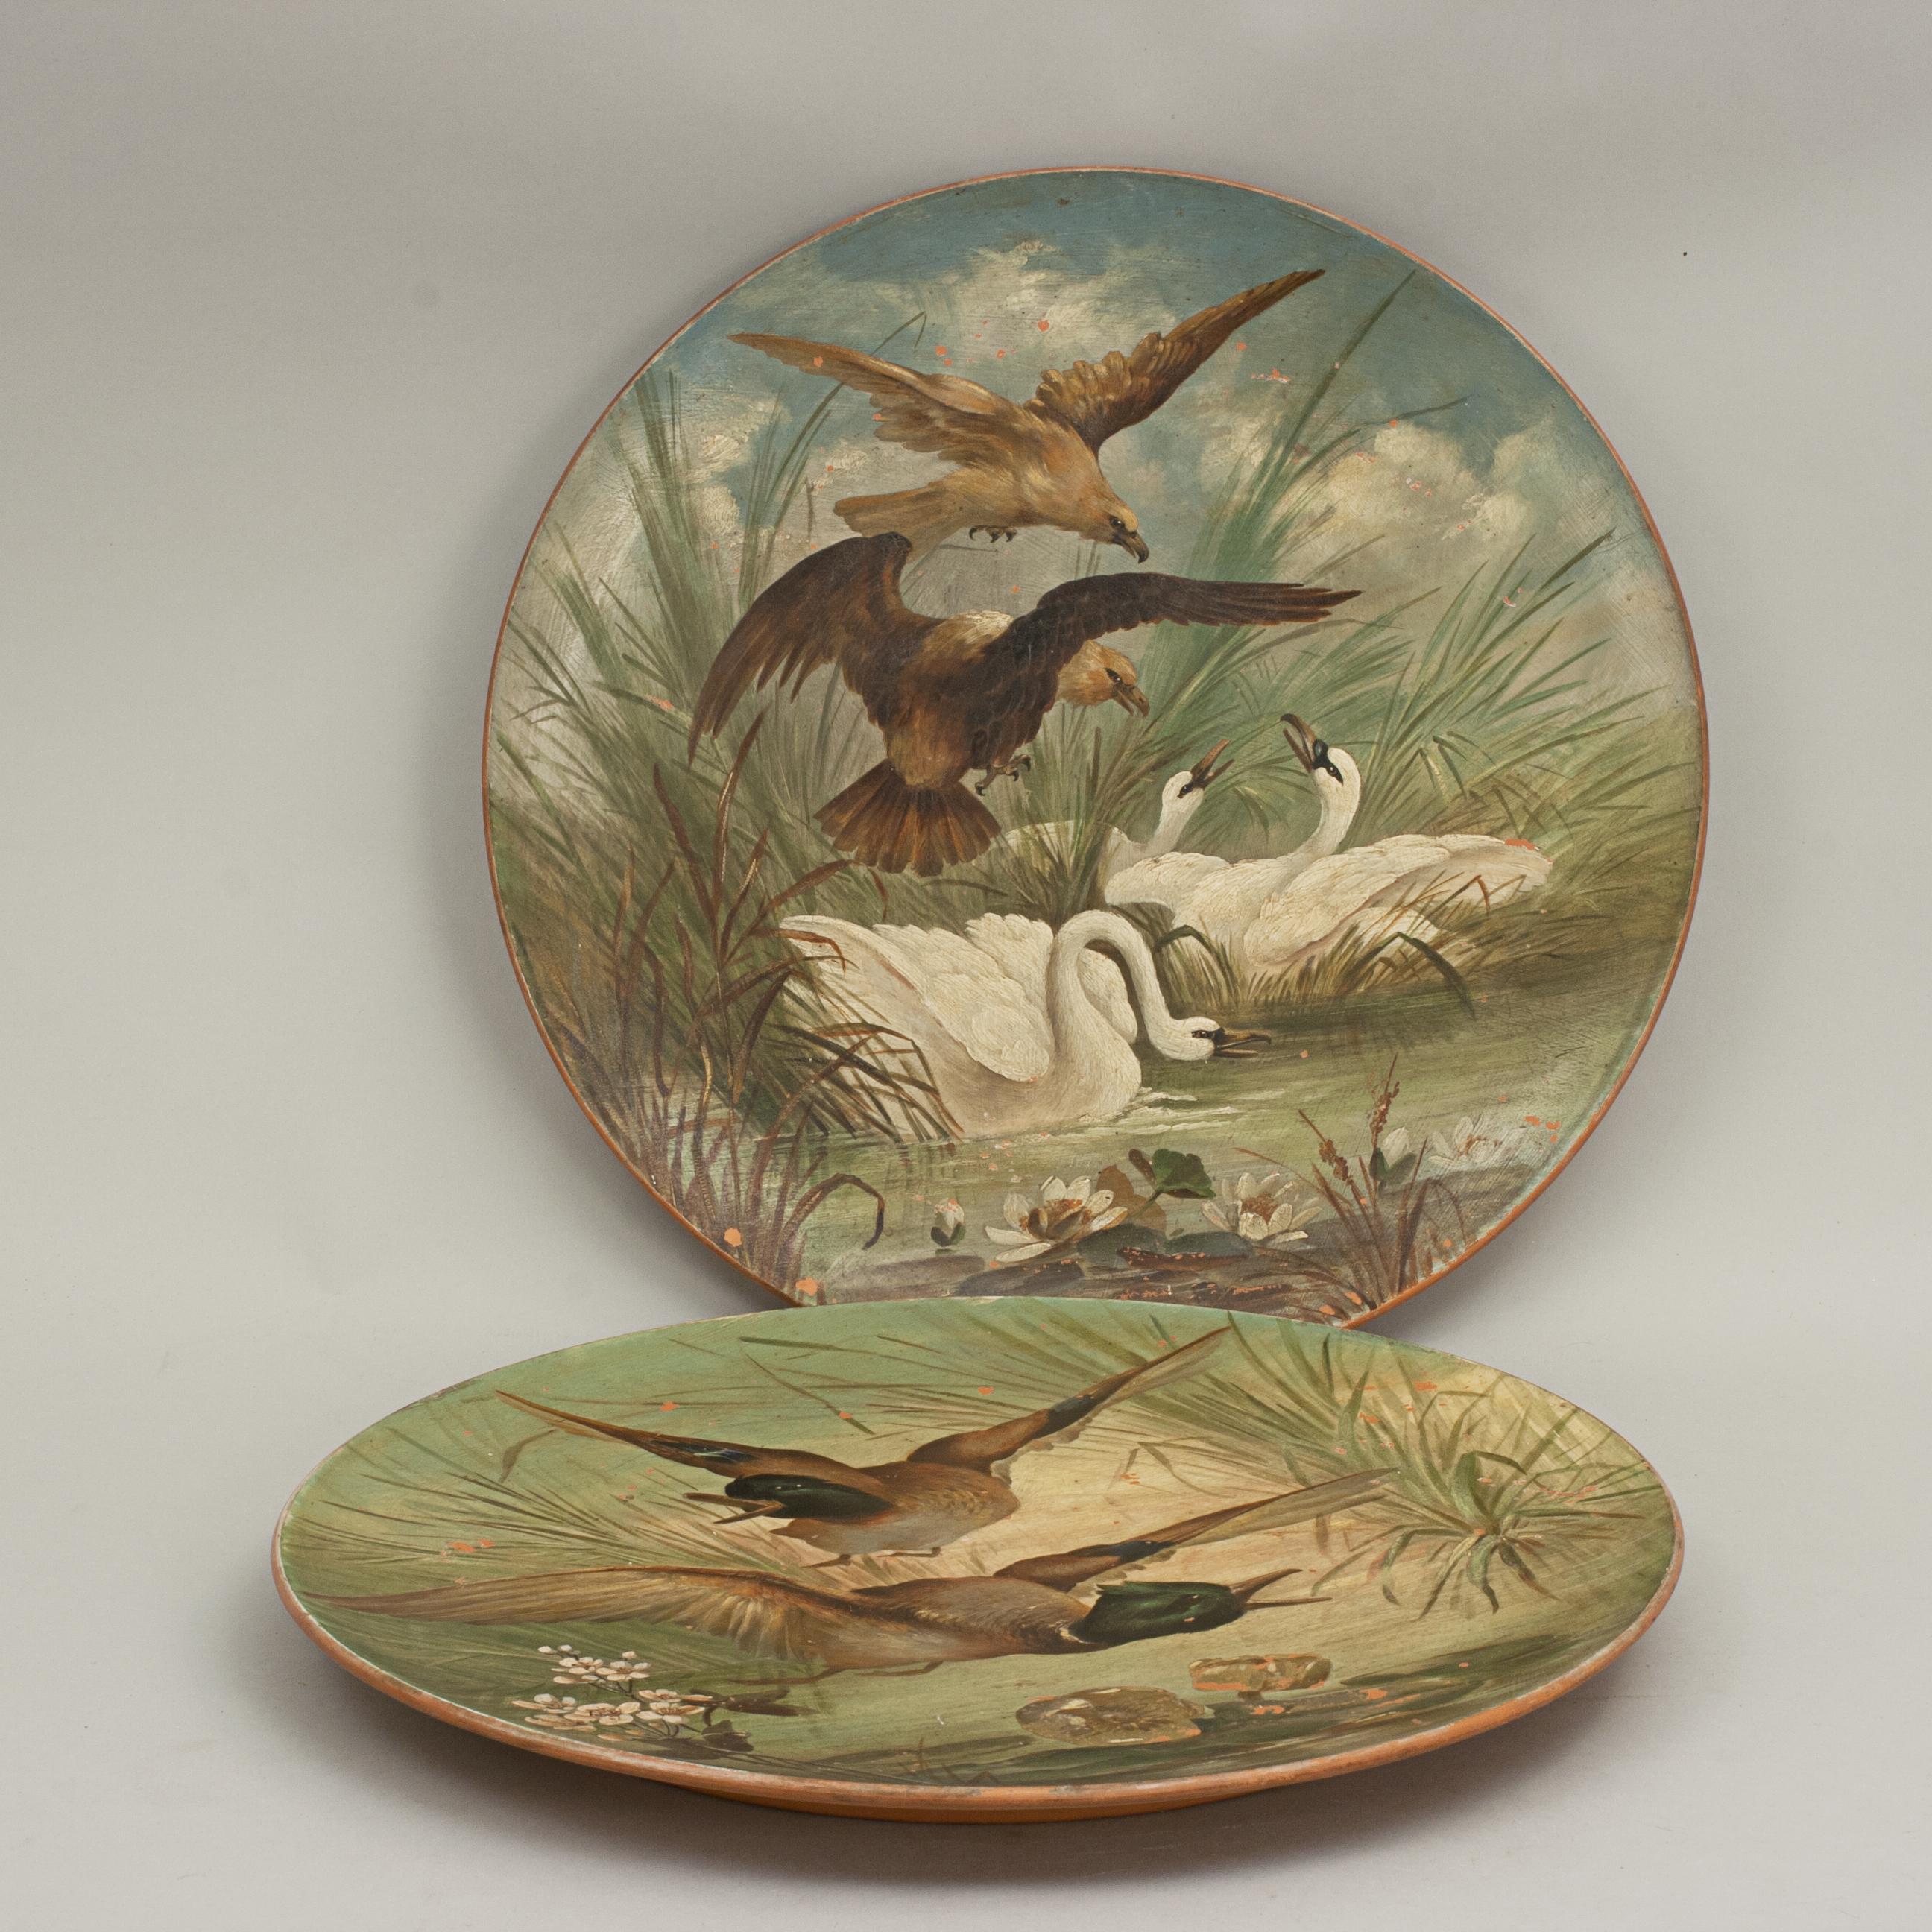 British Antique Hand Painted Terracotta Hunting, Shooting Dishes, 1890